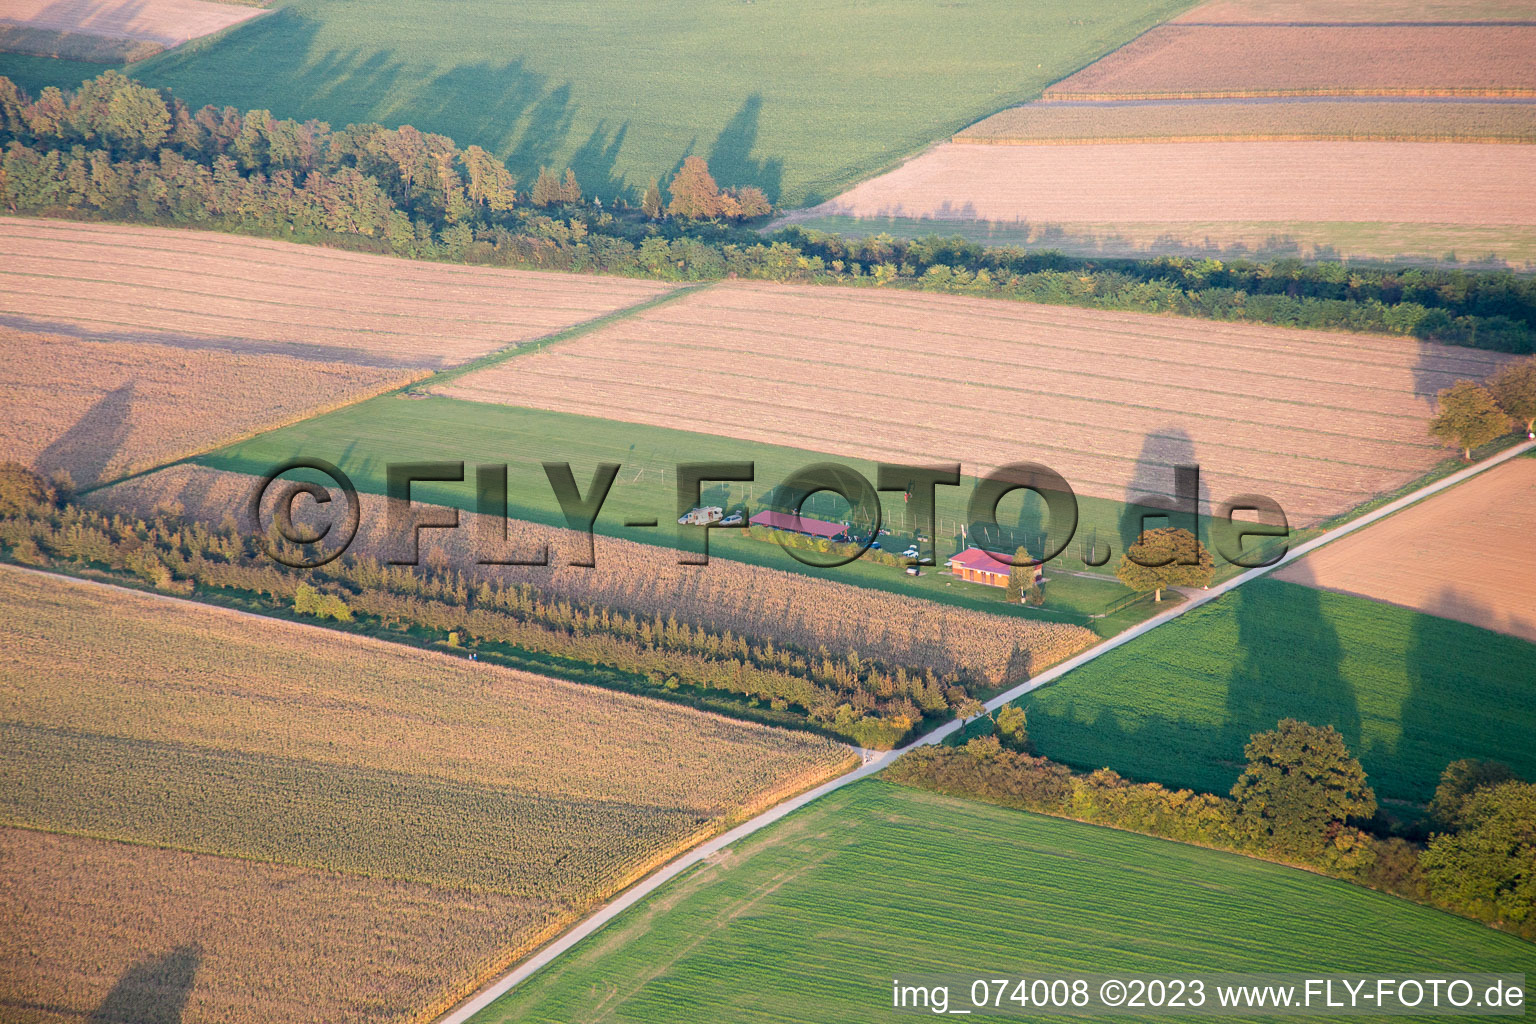 Model airfield in Freckenfeld in the state Rhineland-Palatinate, Germany